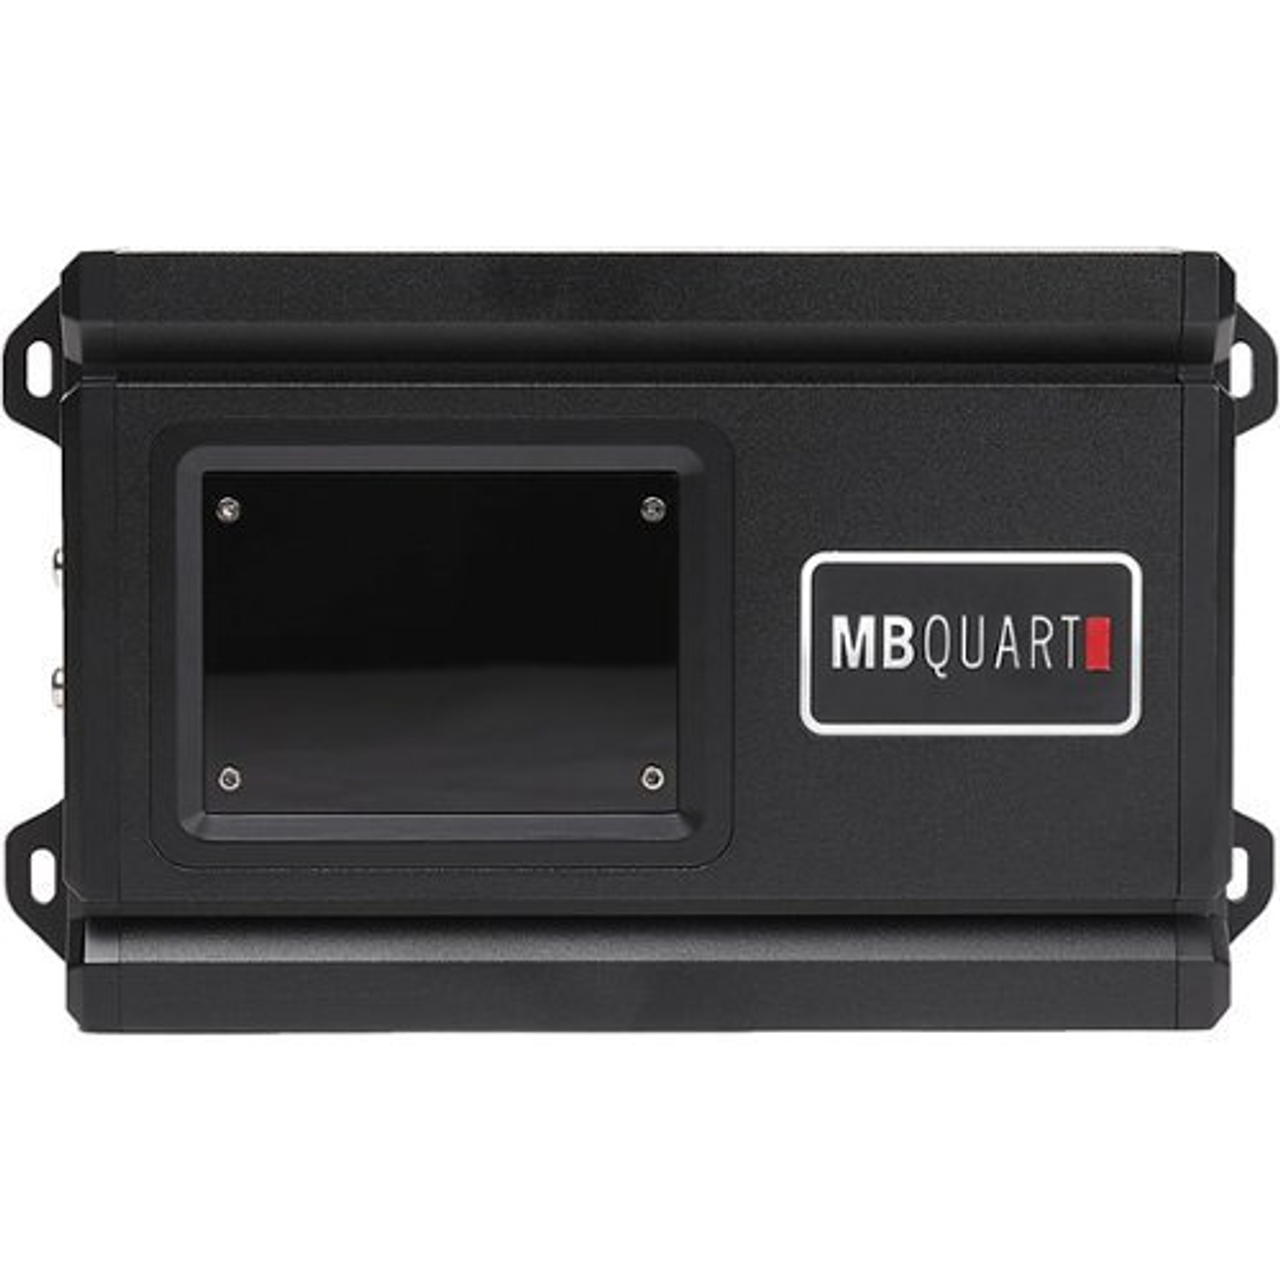 MB Quart - Reference 150W Class D 2-Channel Amplifier - Black